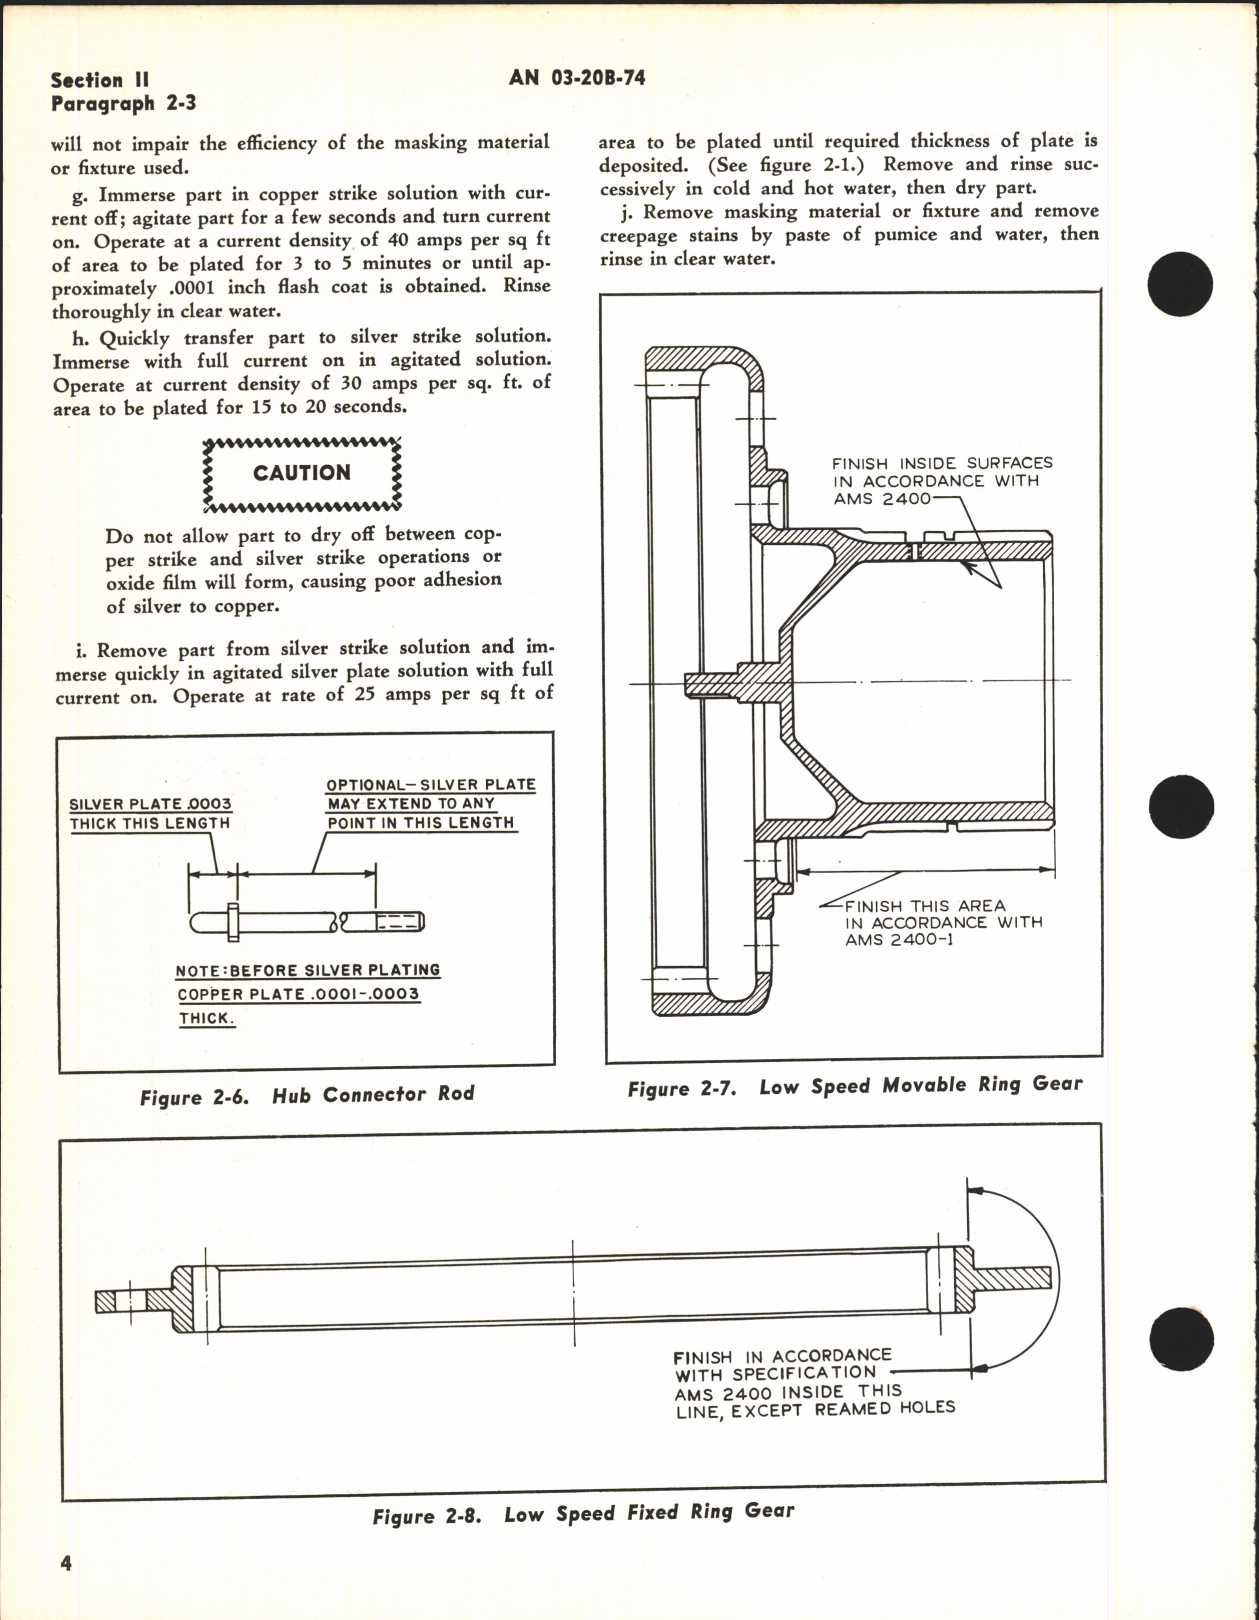 Sample page 6 from AirCorps Library document: Overhaul Instructions Plating and Anodizing Instructions for Electric Propellers